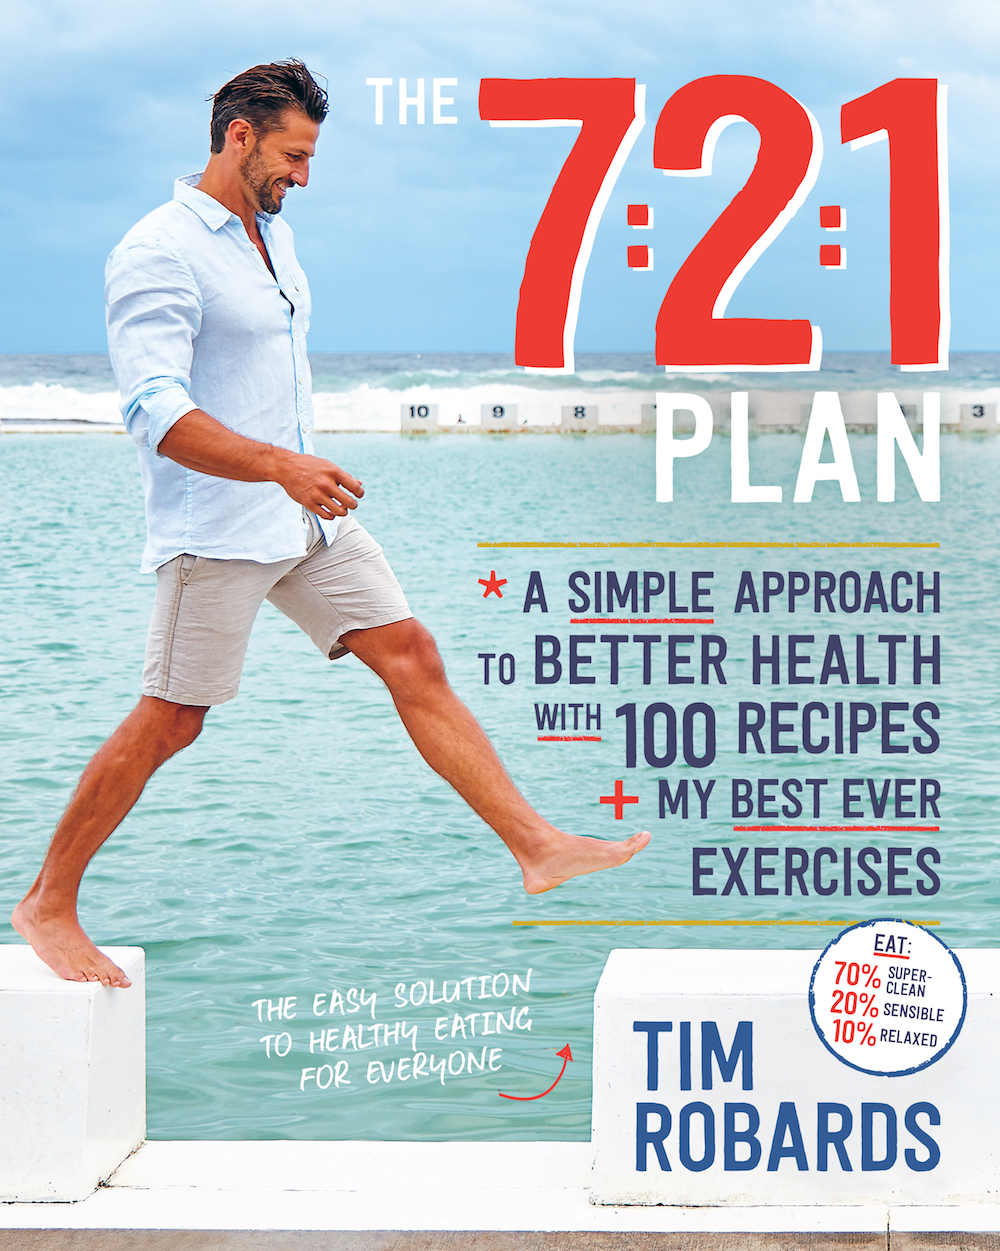 See Need Want Eat Recipe Tim Robards Diet Plan